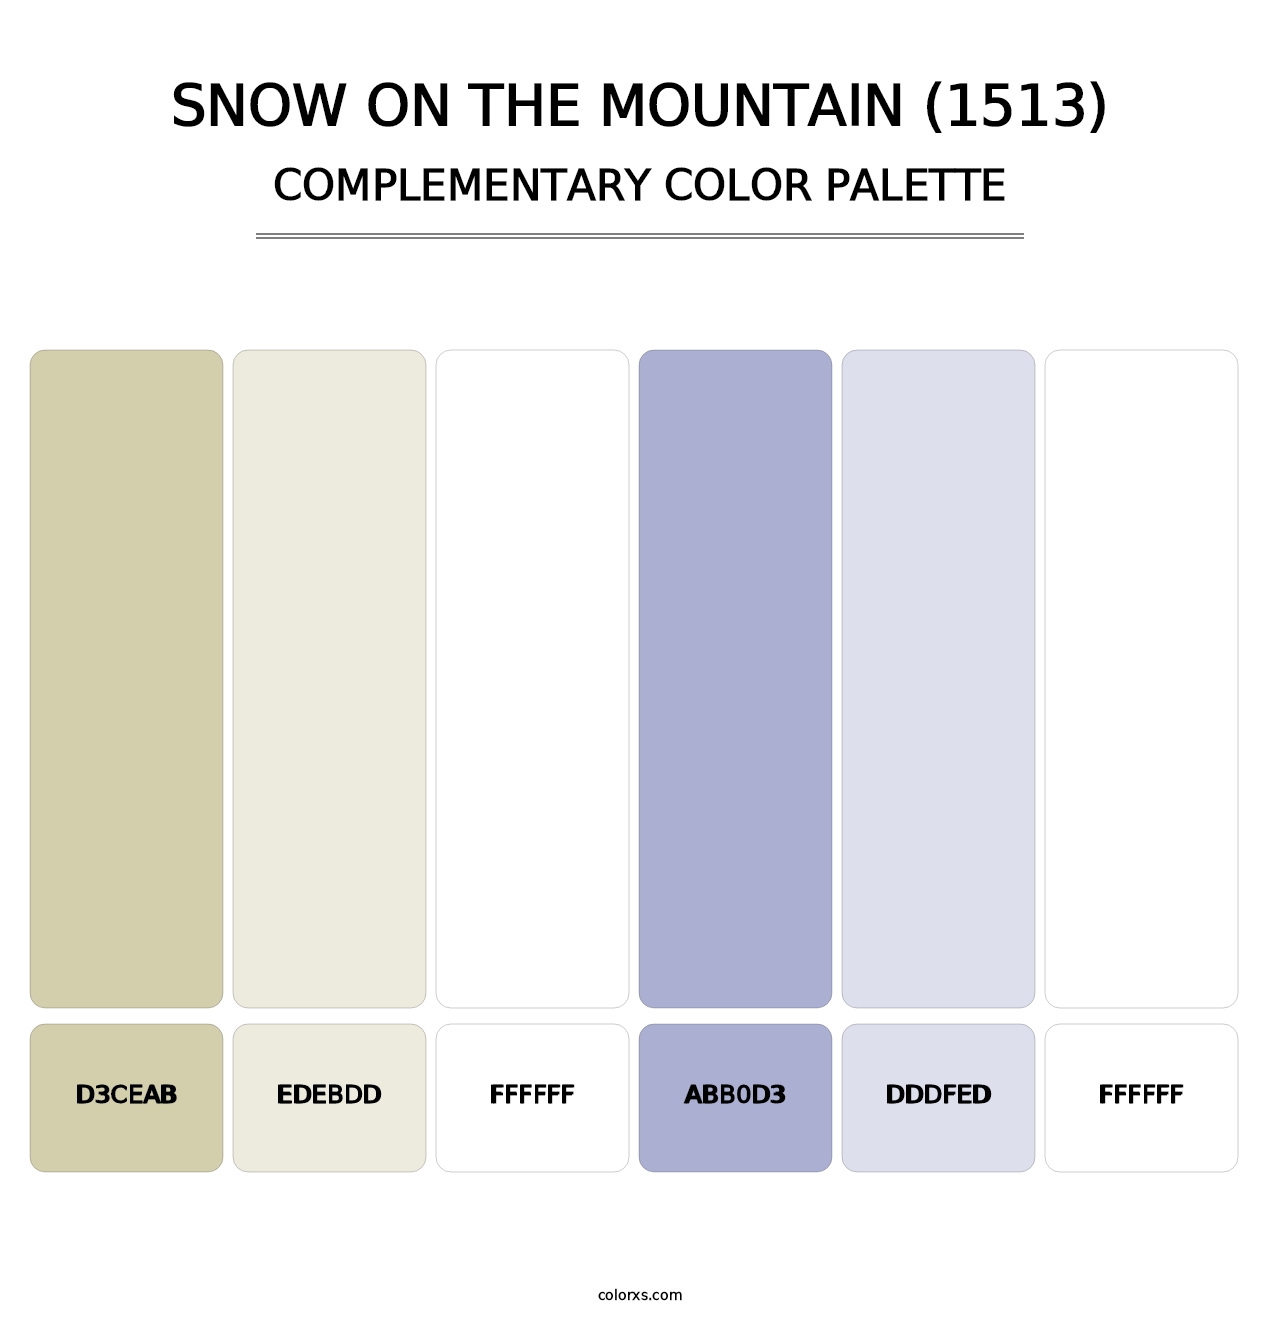 Snow on the Mountain (1513) - Complementary Color Palette